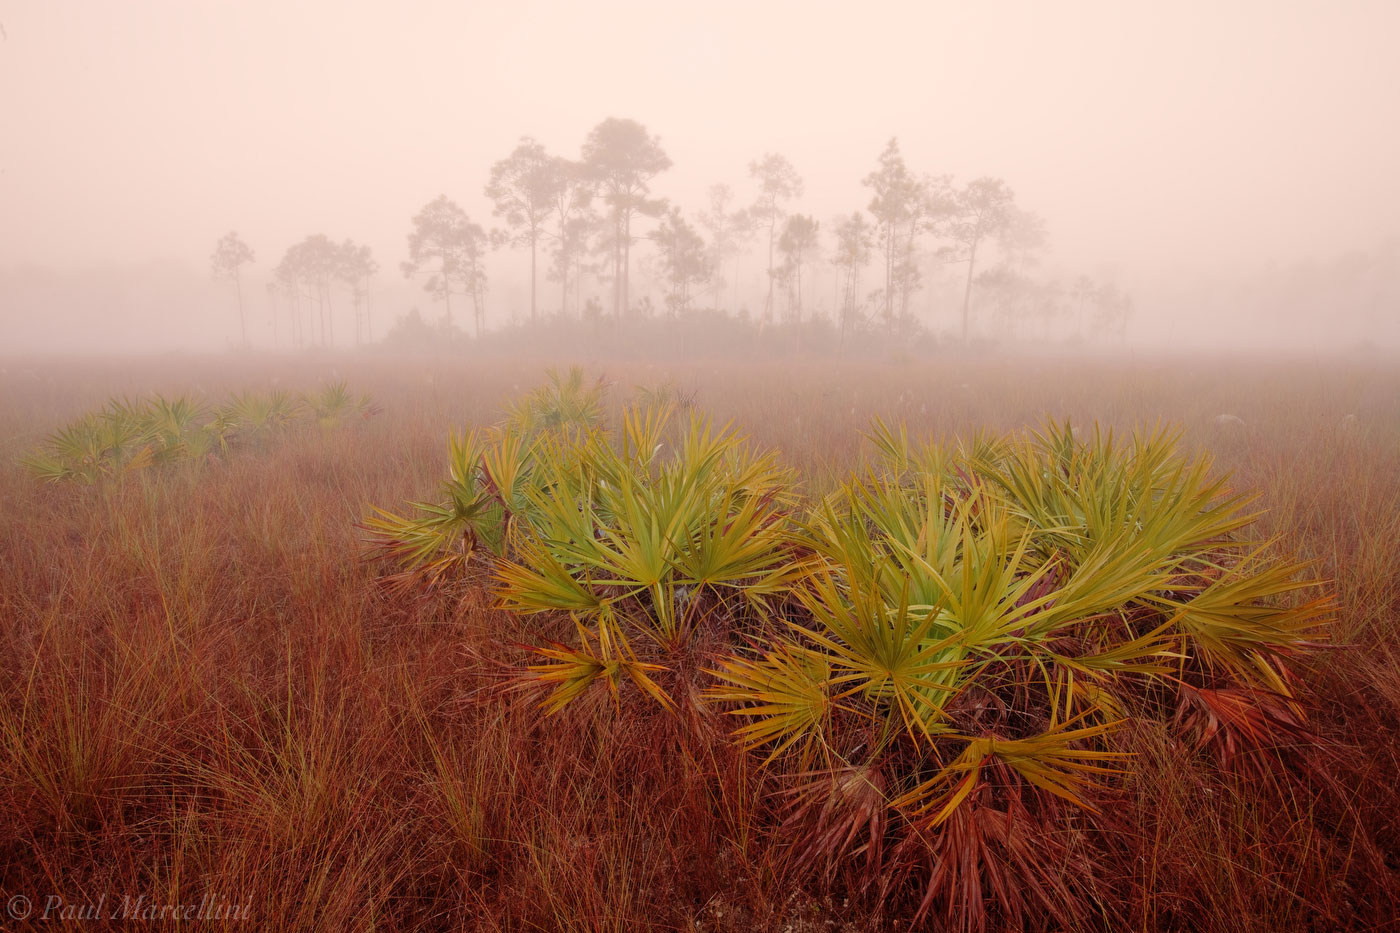 A new day and a new year. One of the first images taken in 2011, in one of my favorite places in the Everglades, the rocky pinelands...